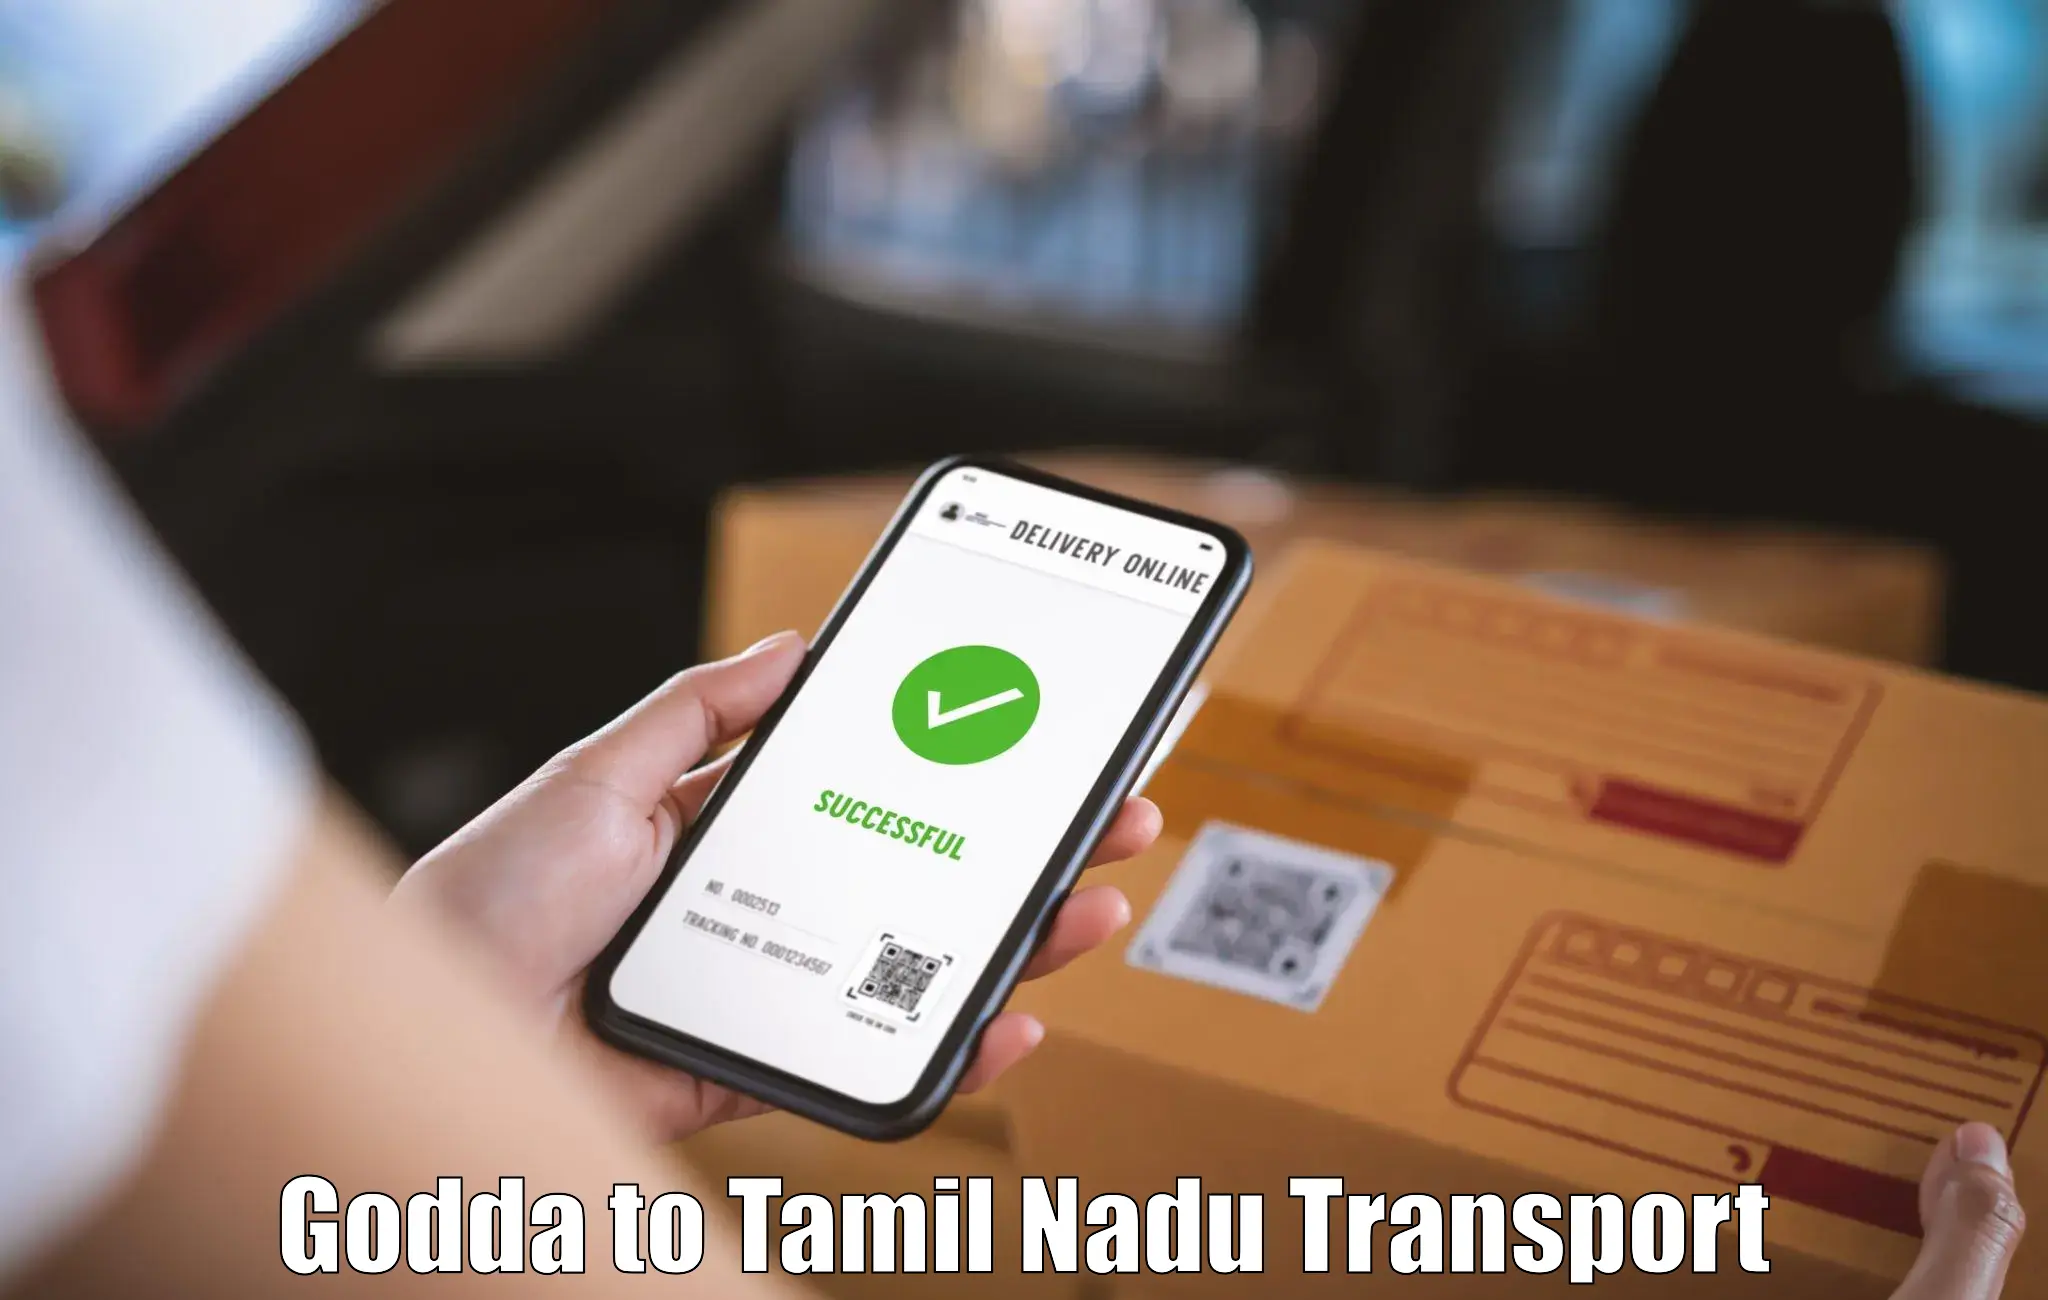 Two wheeler parcel service Godda to Nagercoil